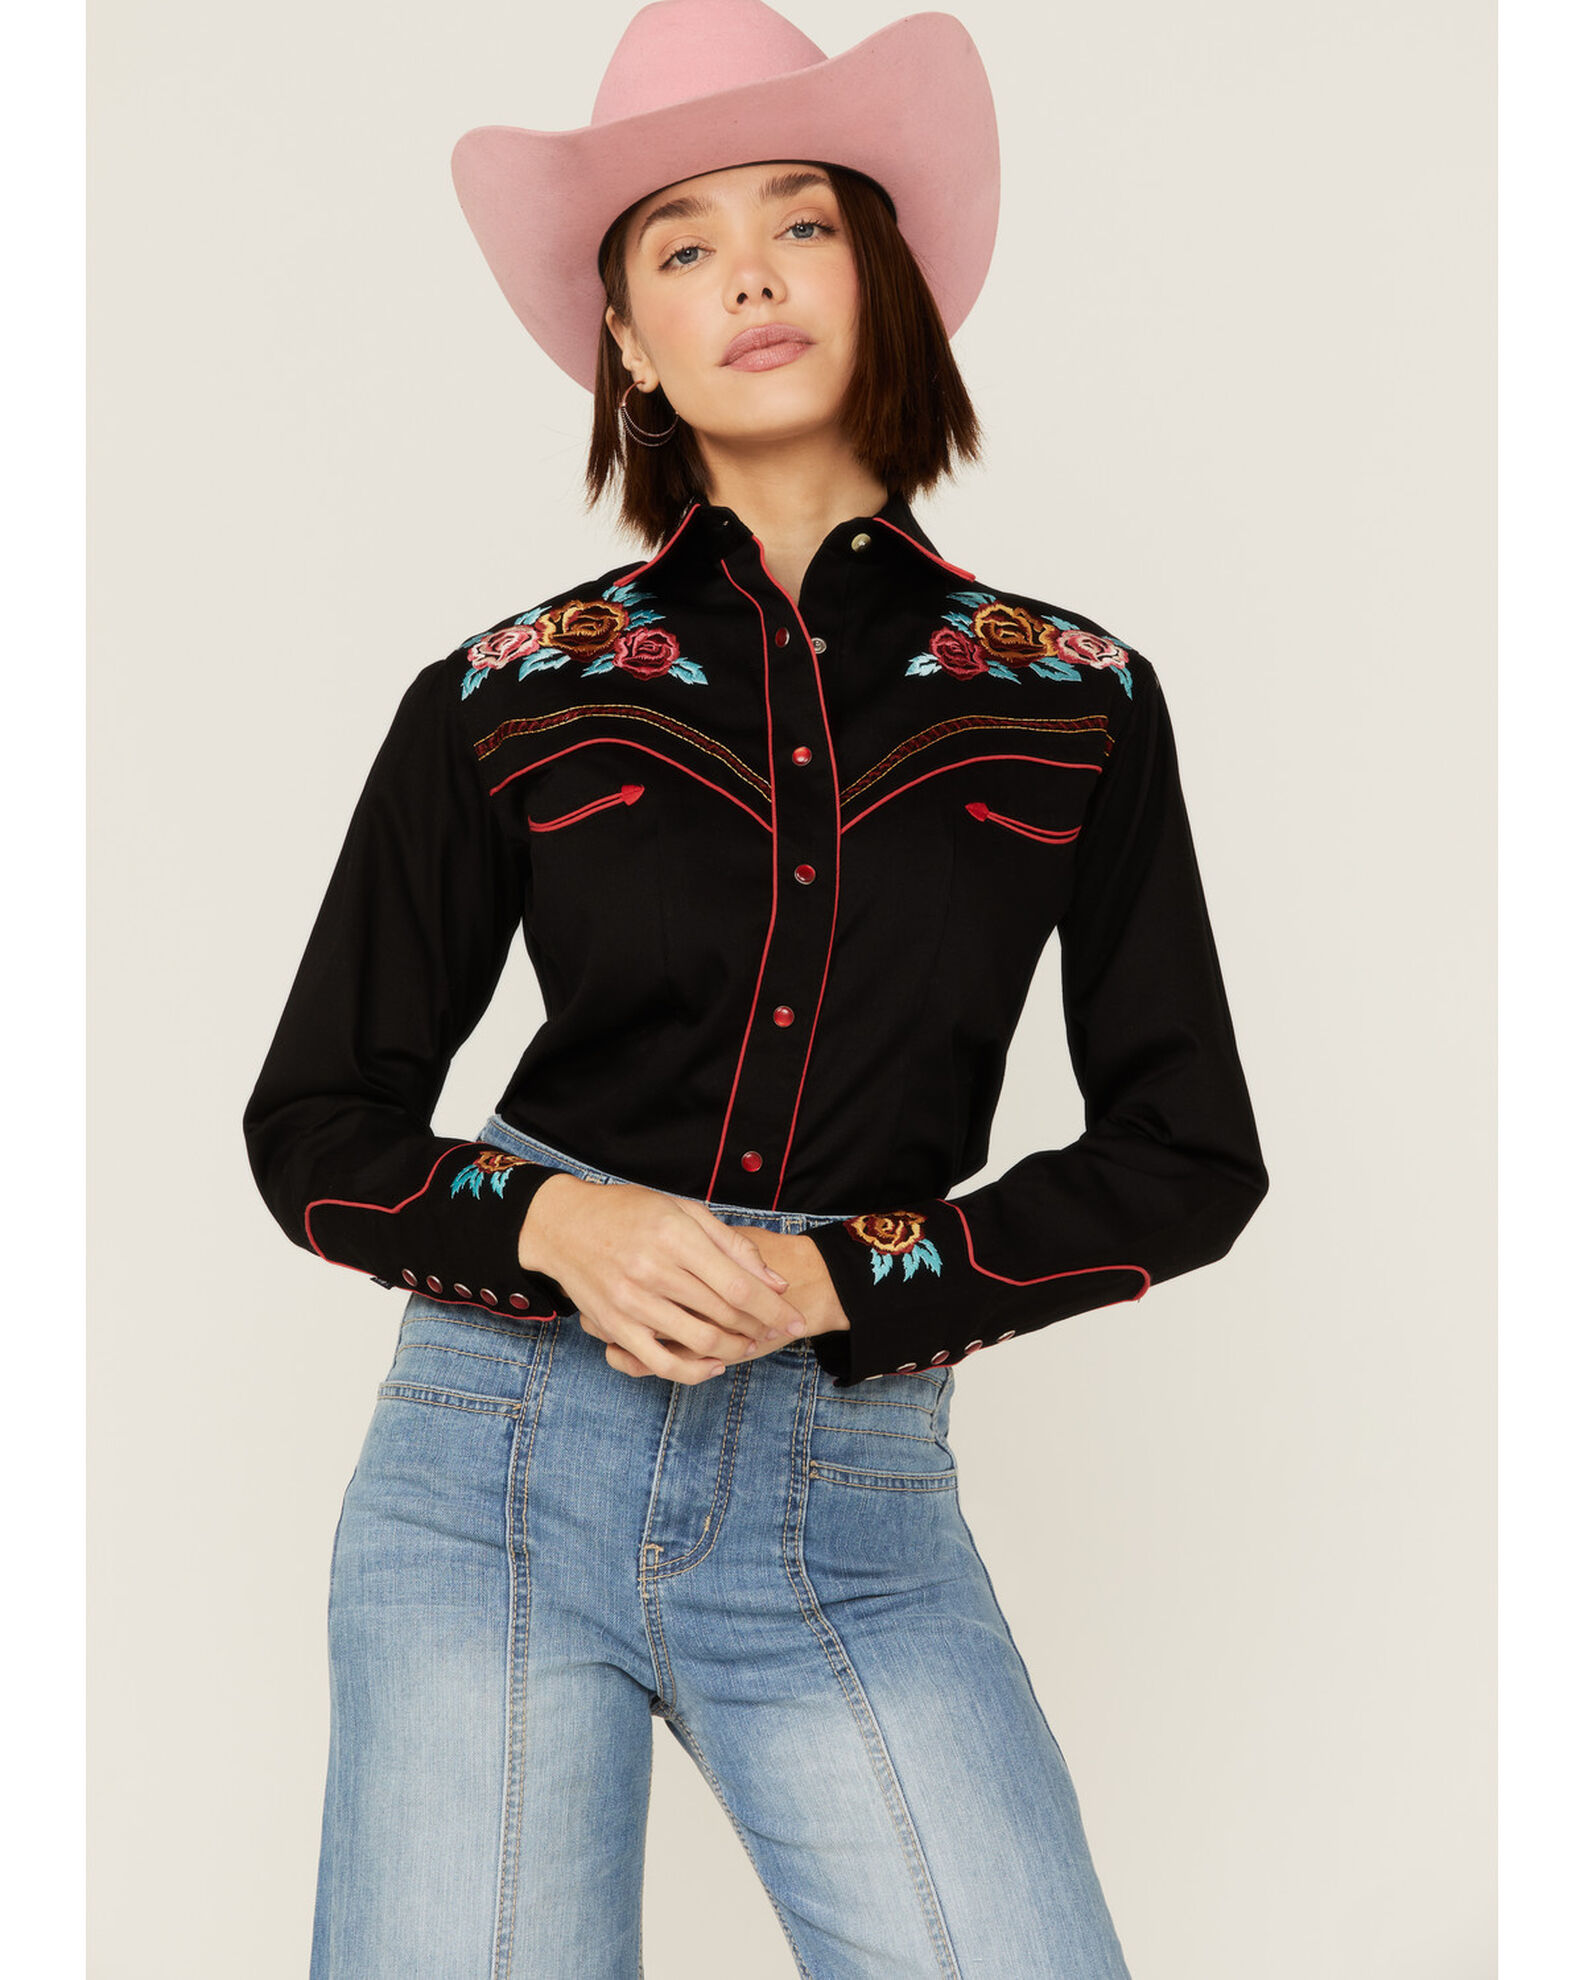 Rockmount Ranchwear Women's Vintage Rose Bouquet Embroidered Pearl Snap Western  Shirt - Country Outfitter